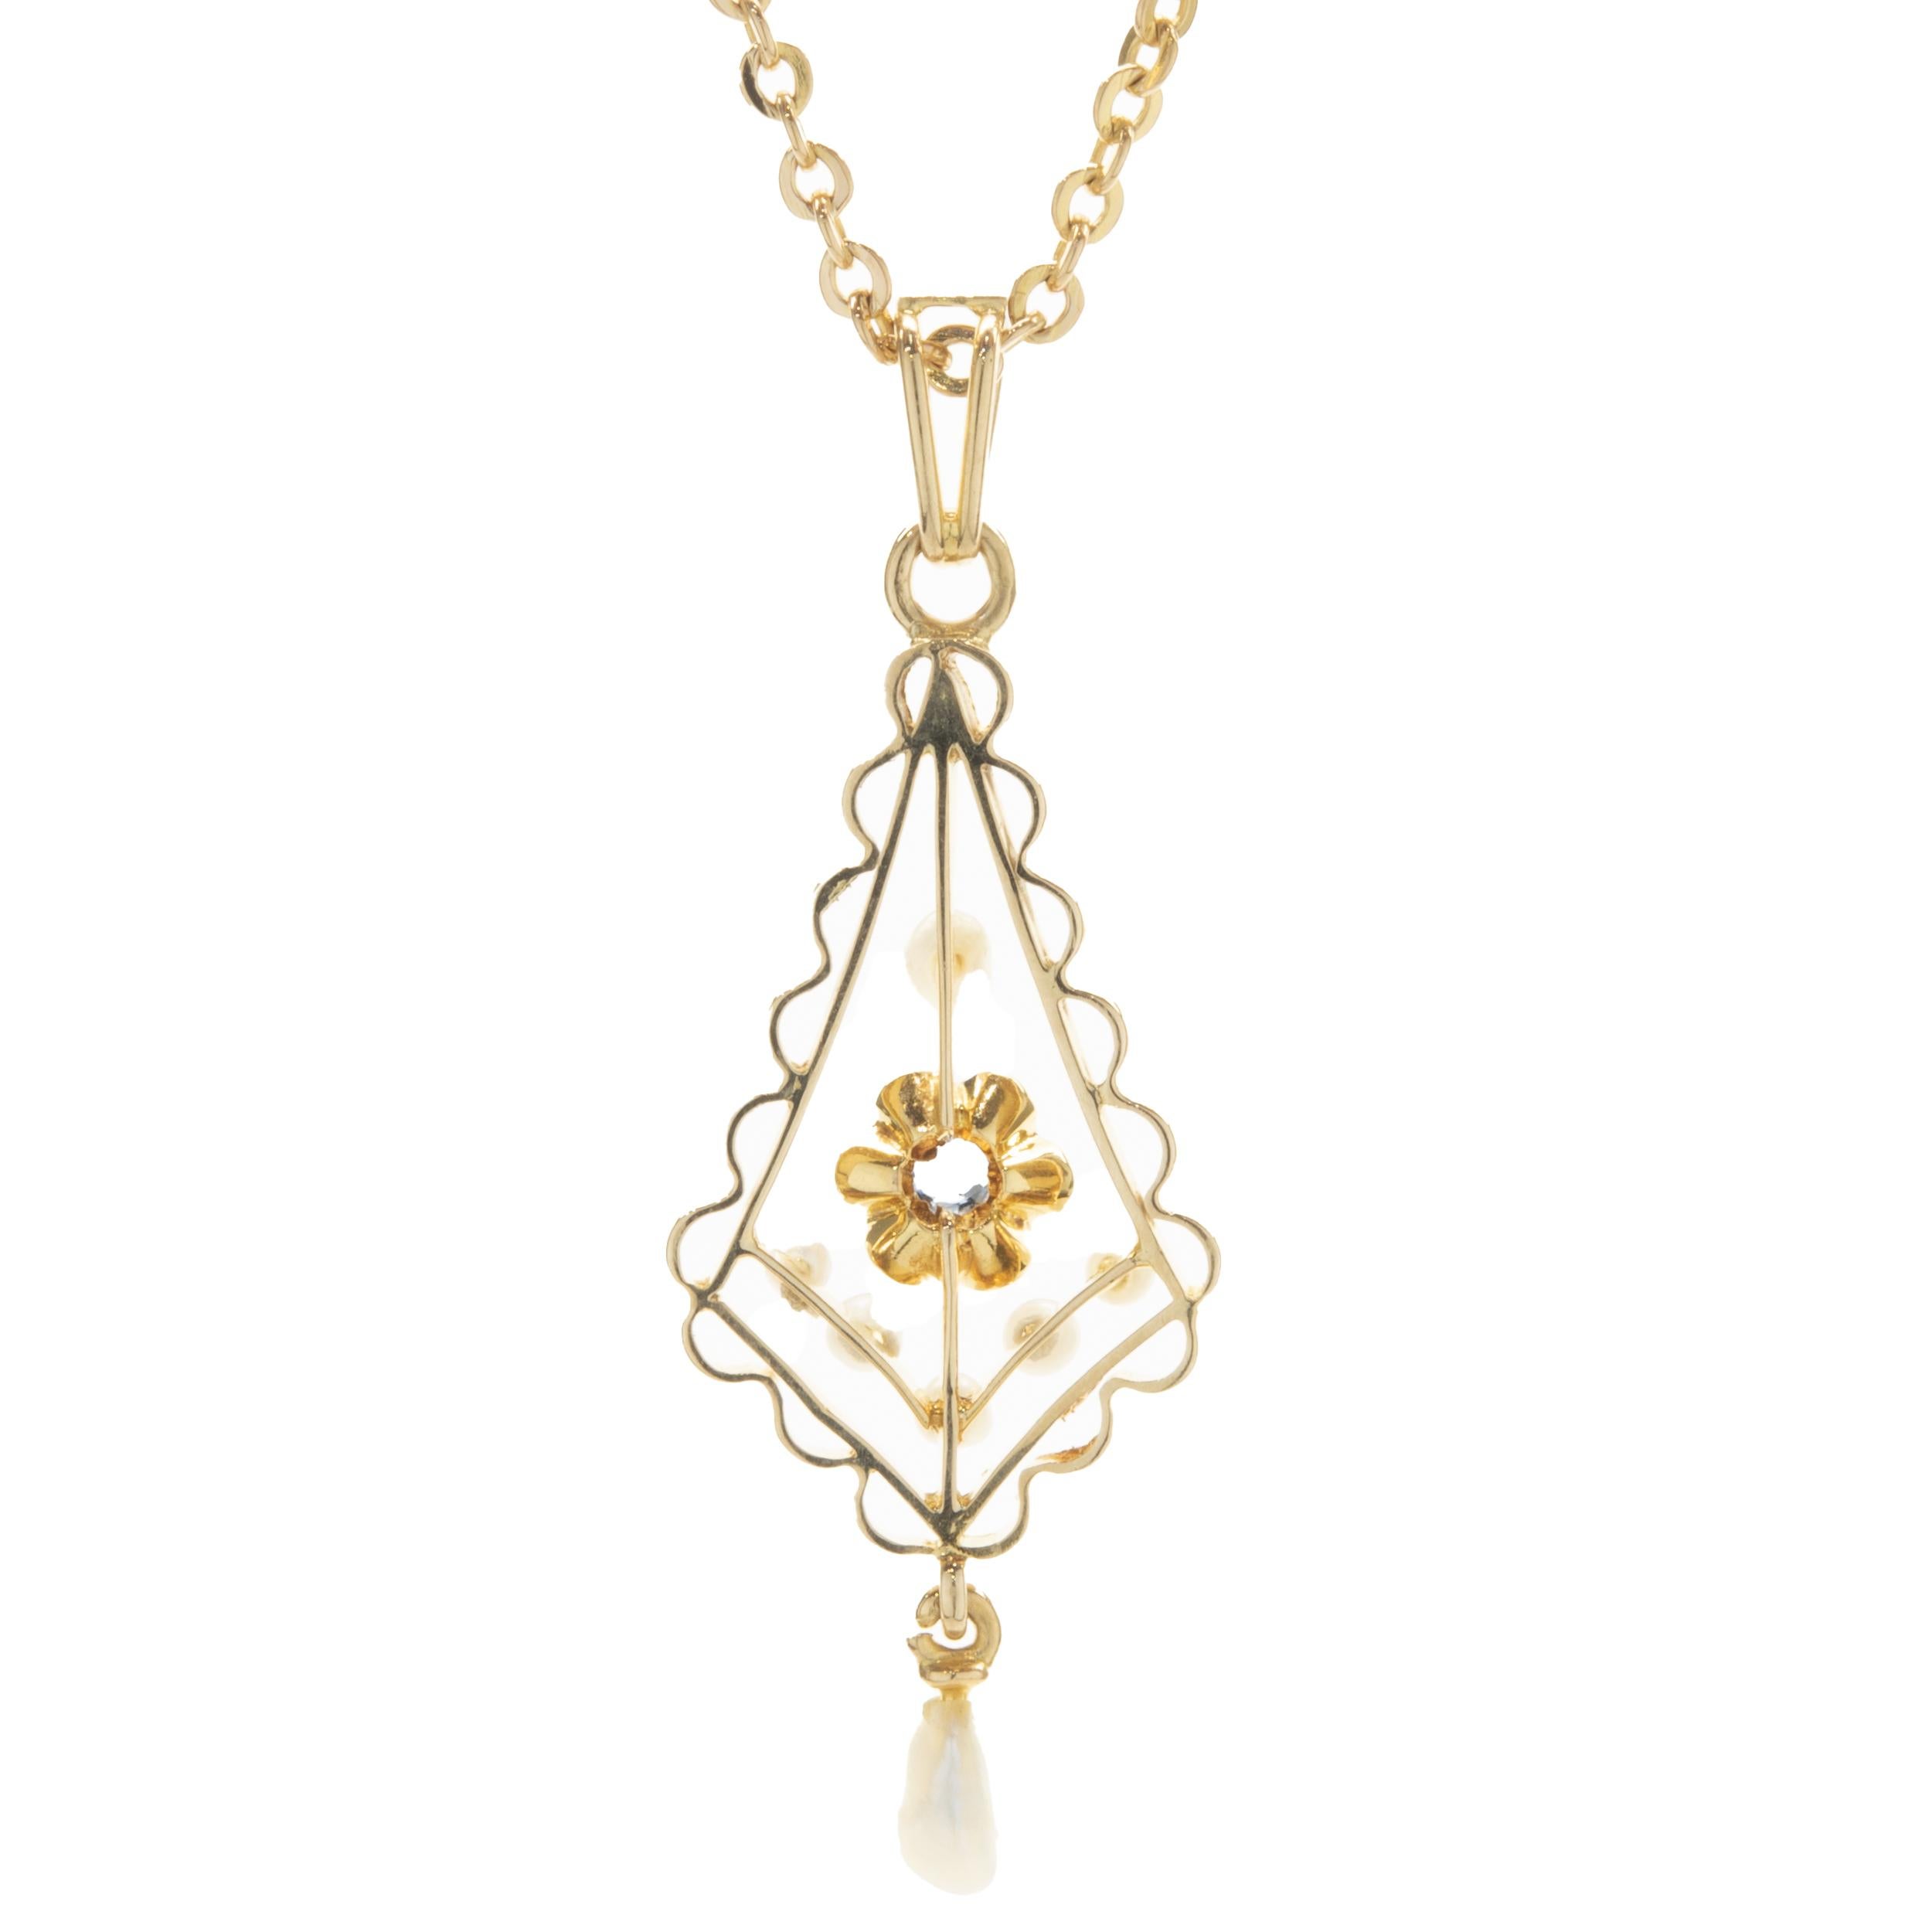 Designer: Custom
Material: 14K yellow gold
Dimensions: necklace measures 18-inches in length
Weight: 3.87 grams